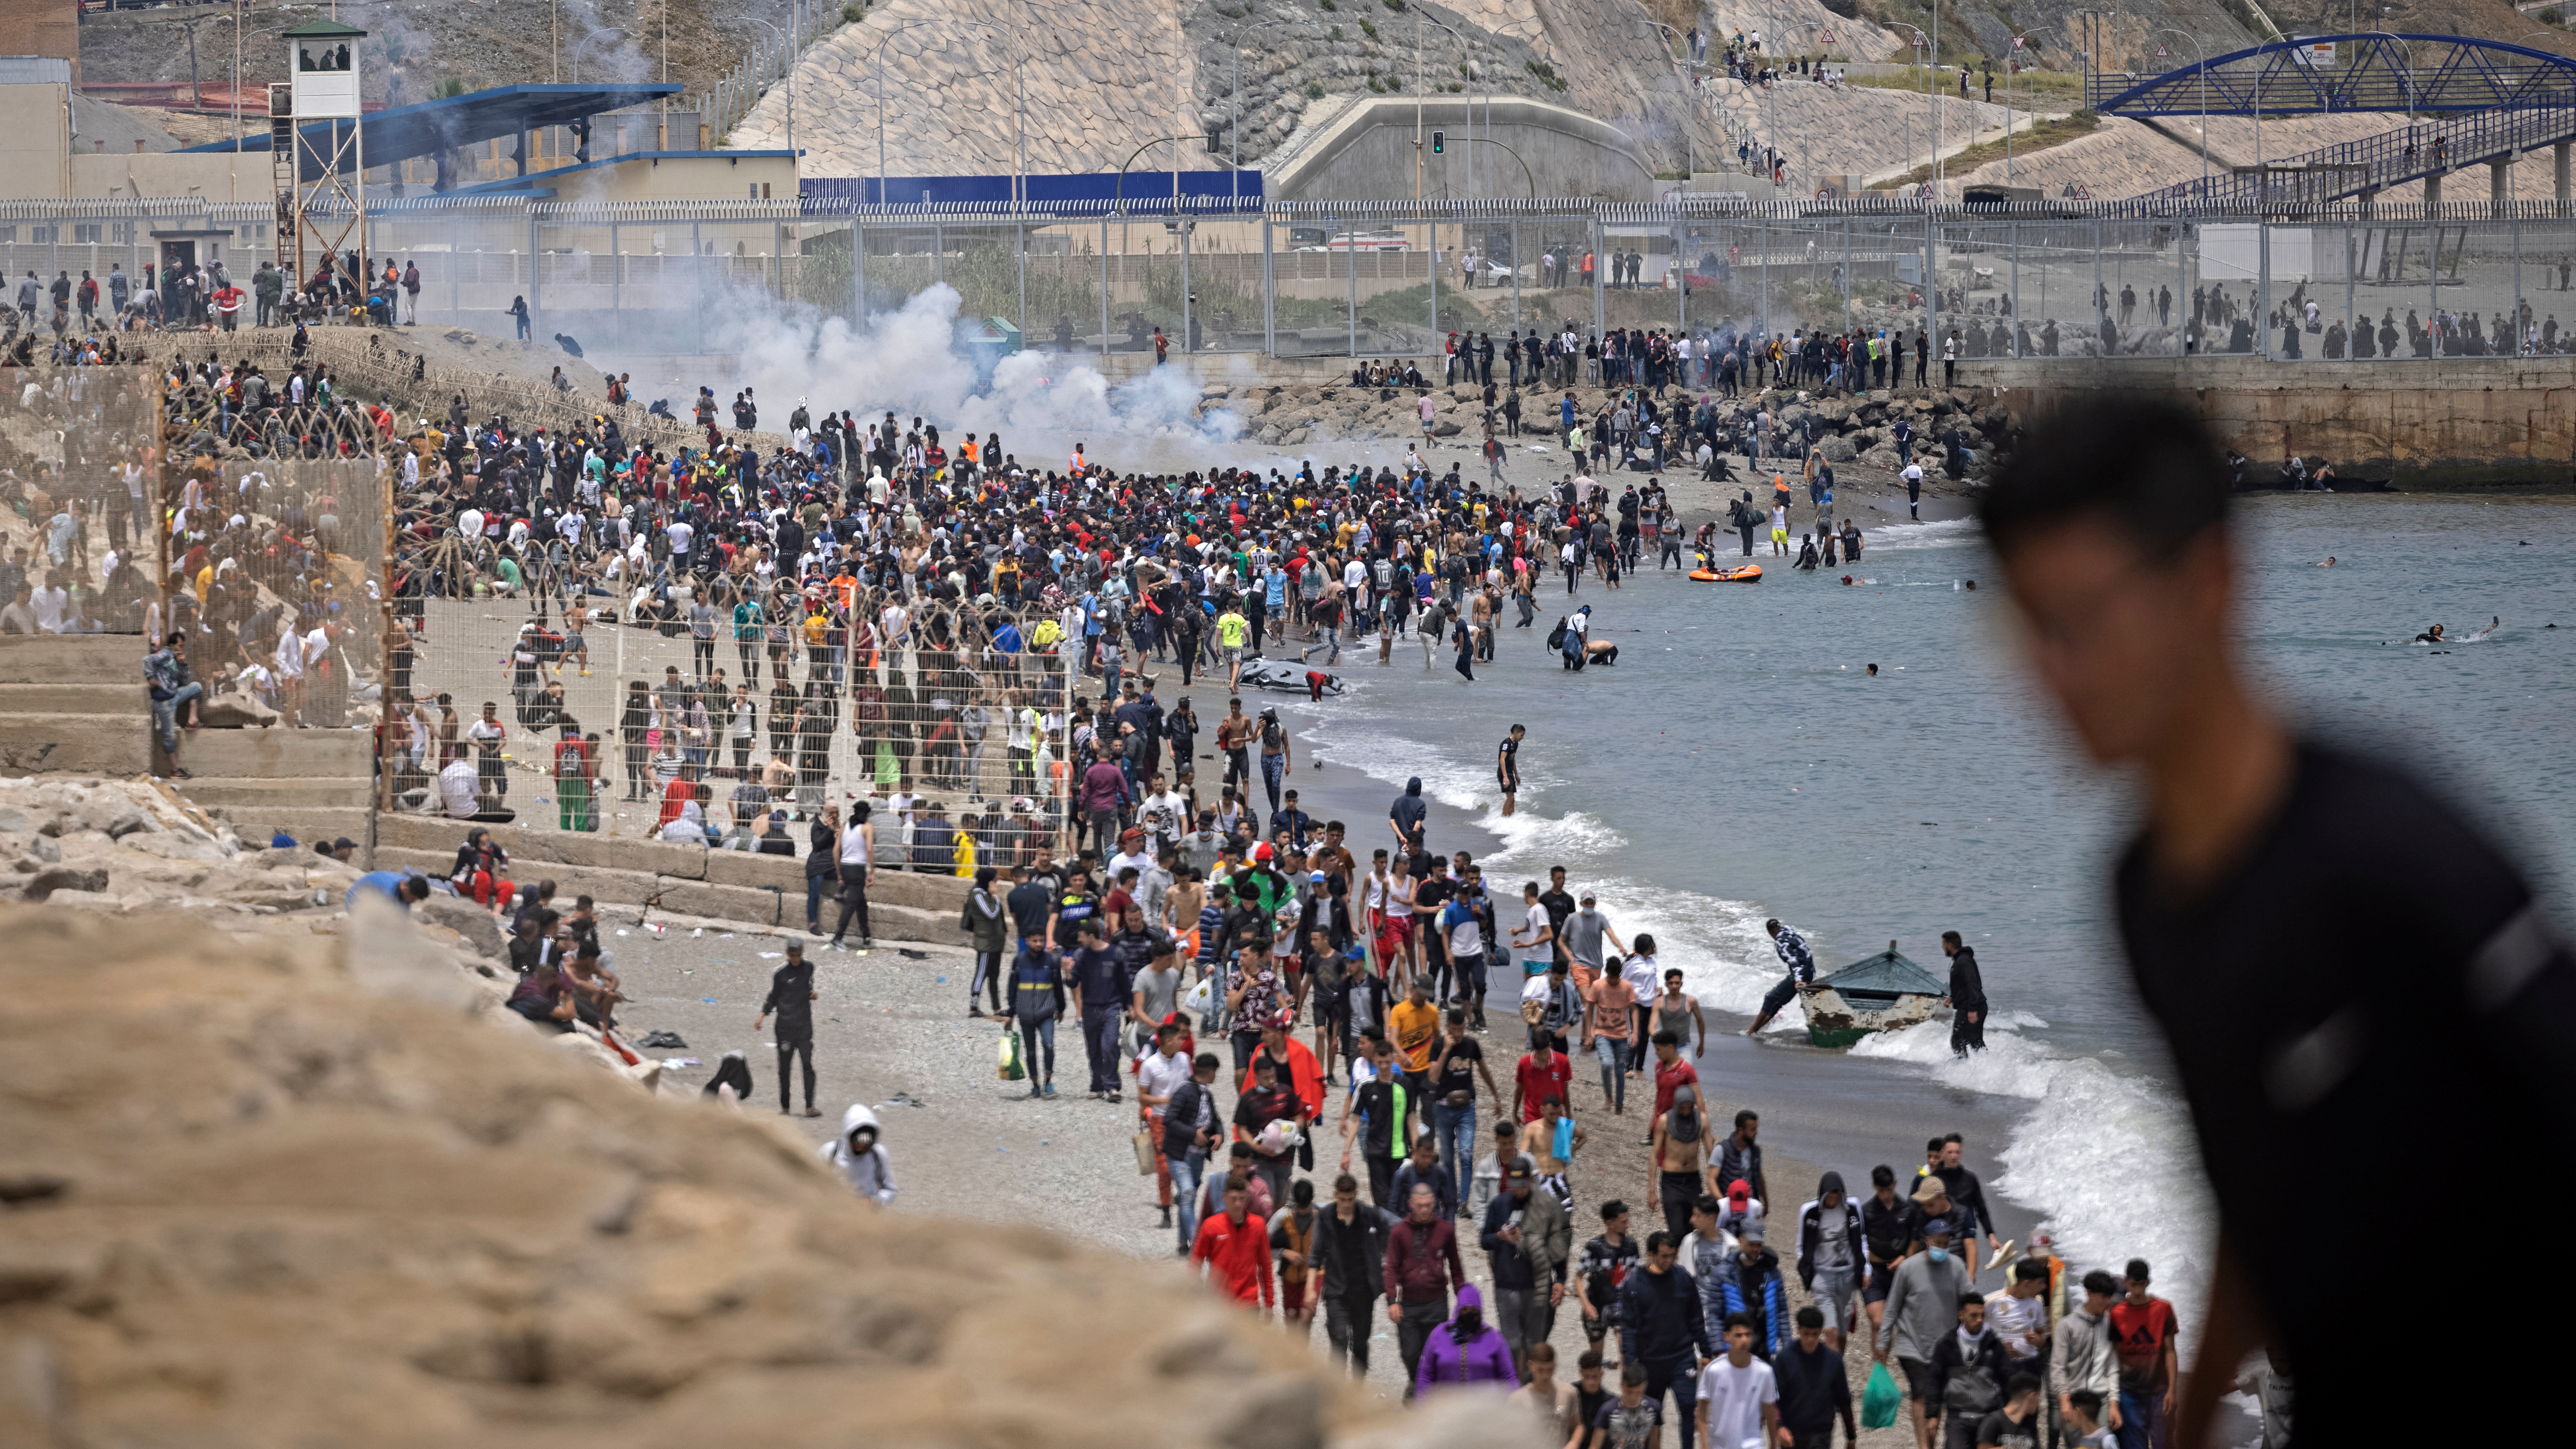 Spanish police try to disperse migrants at a border between Morocco and the Spanish enclave of Ceuta. /AFP